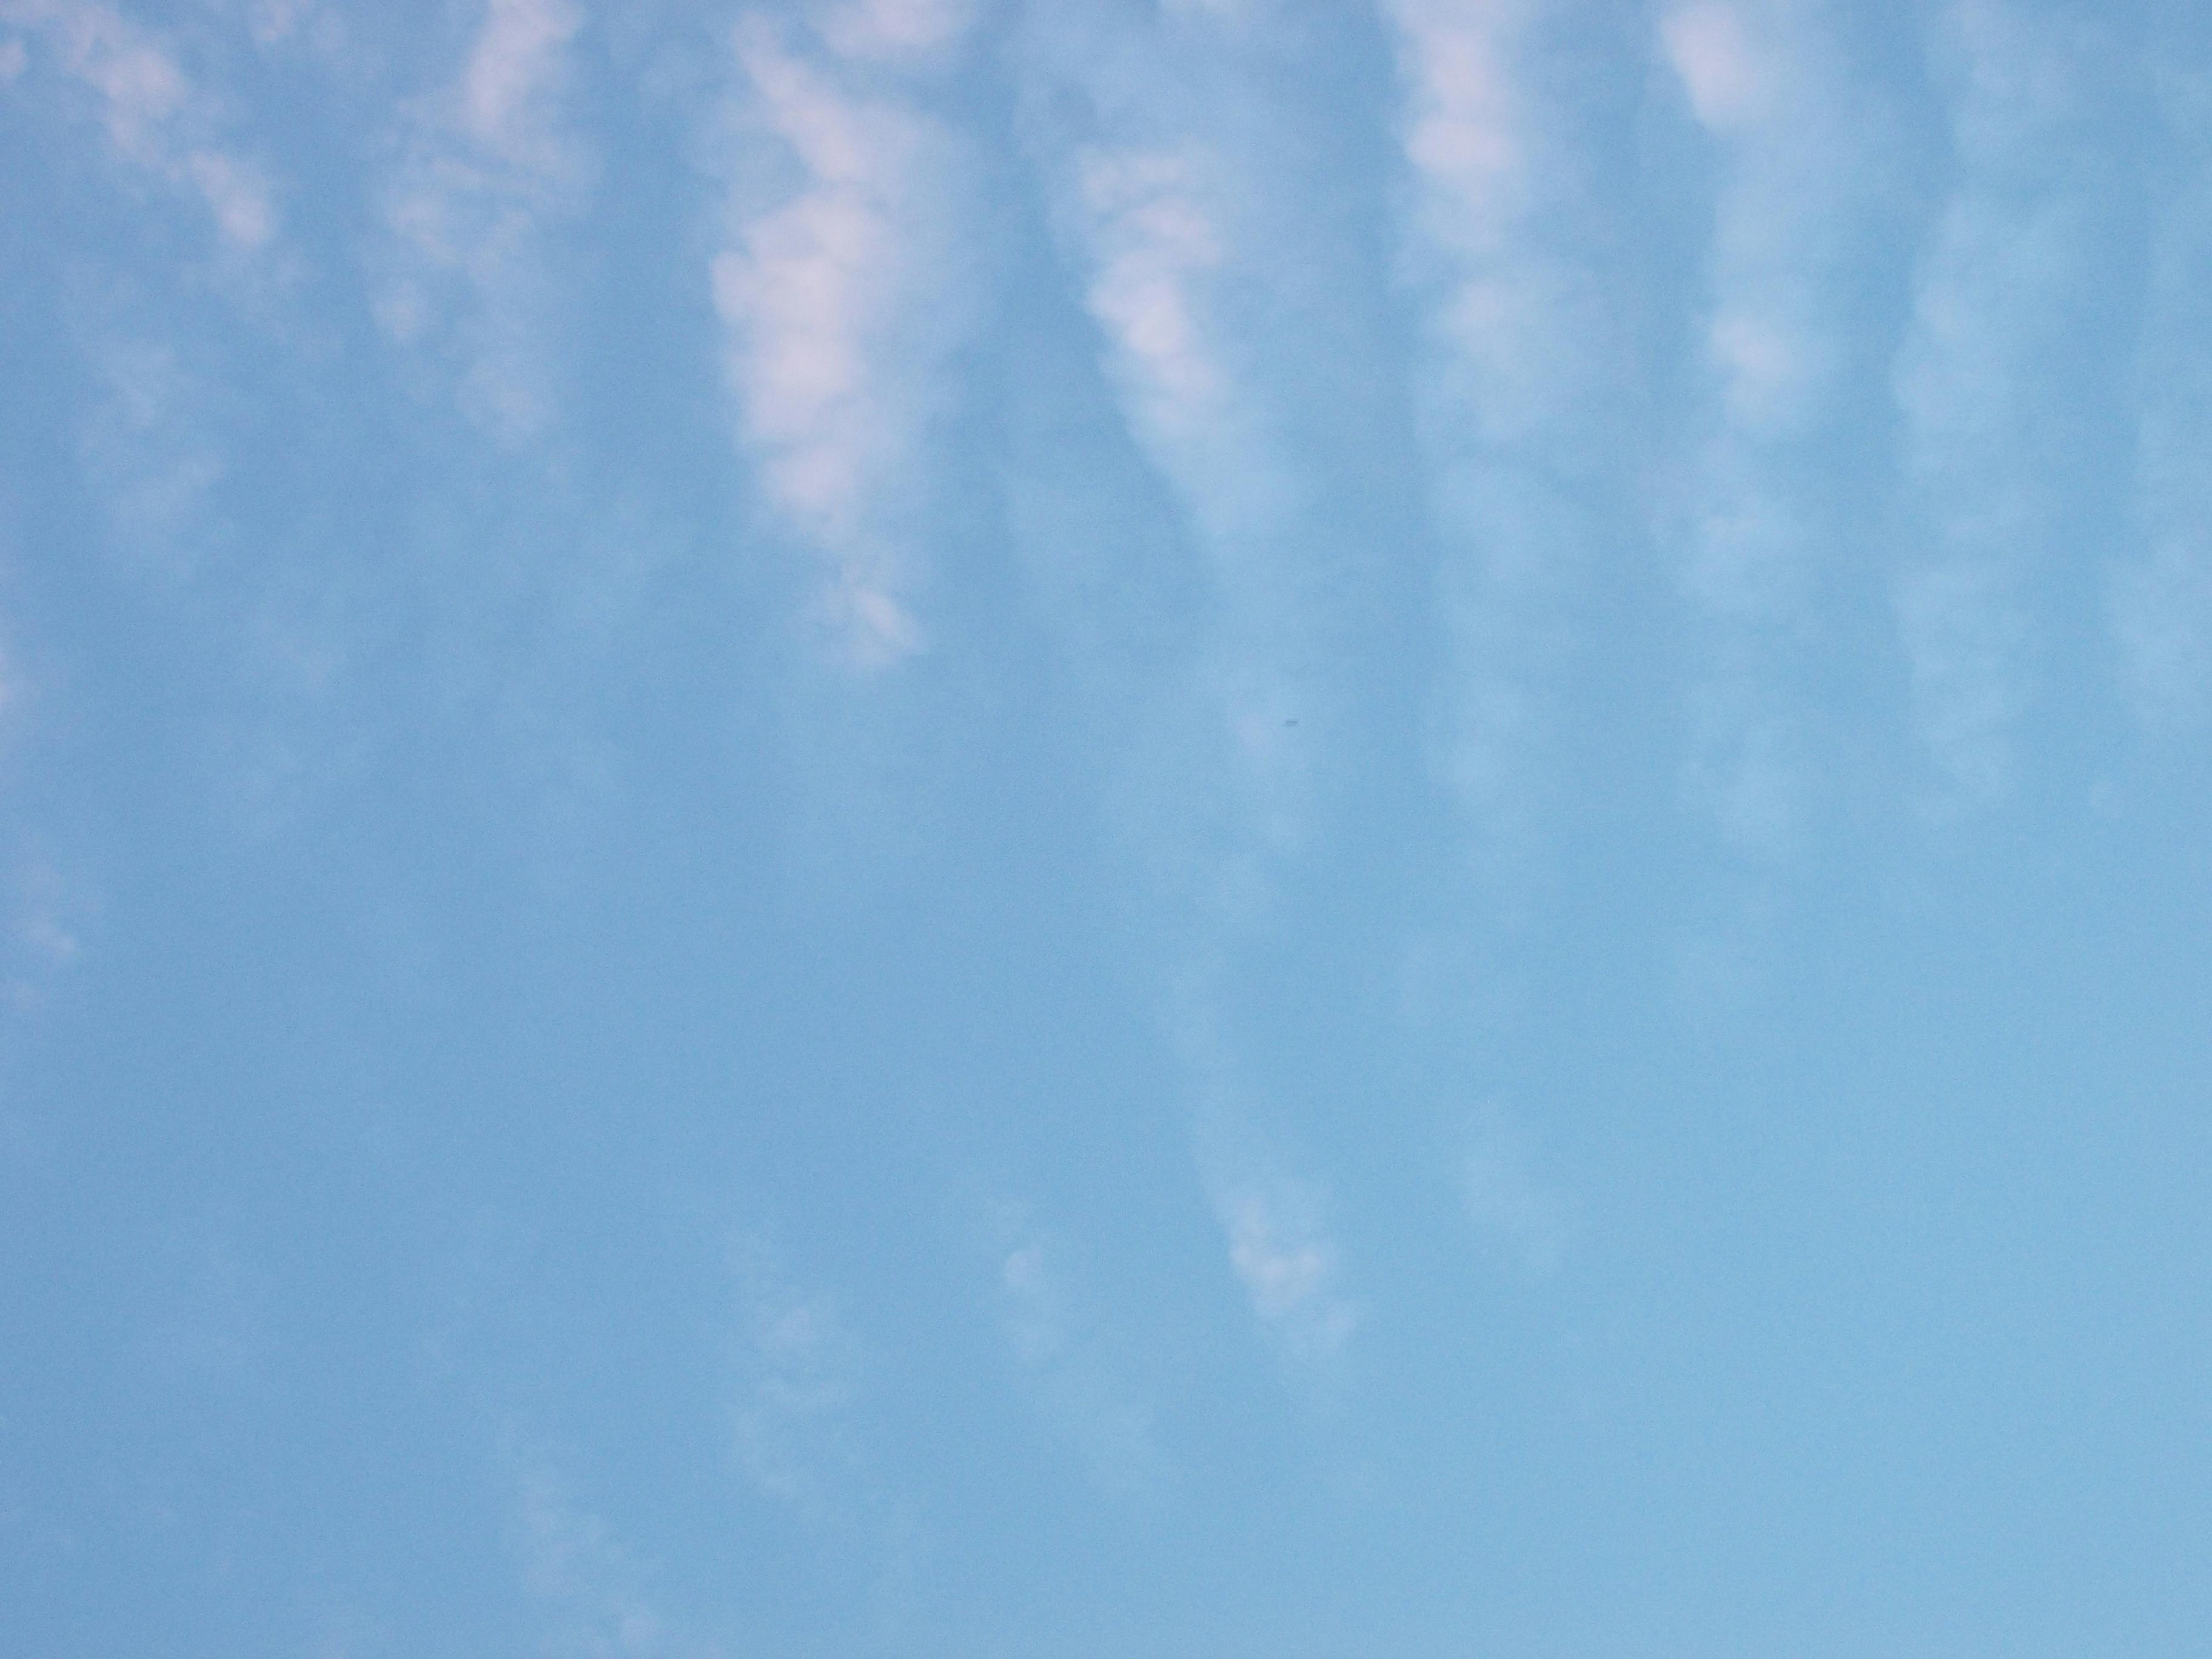 Free stock photo of cloud, clouds, pattern